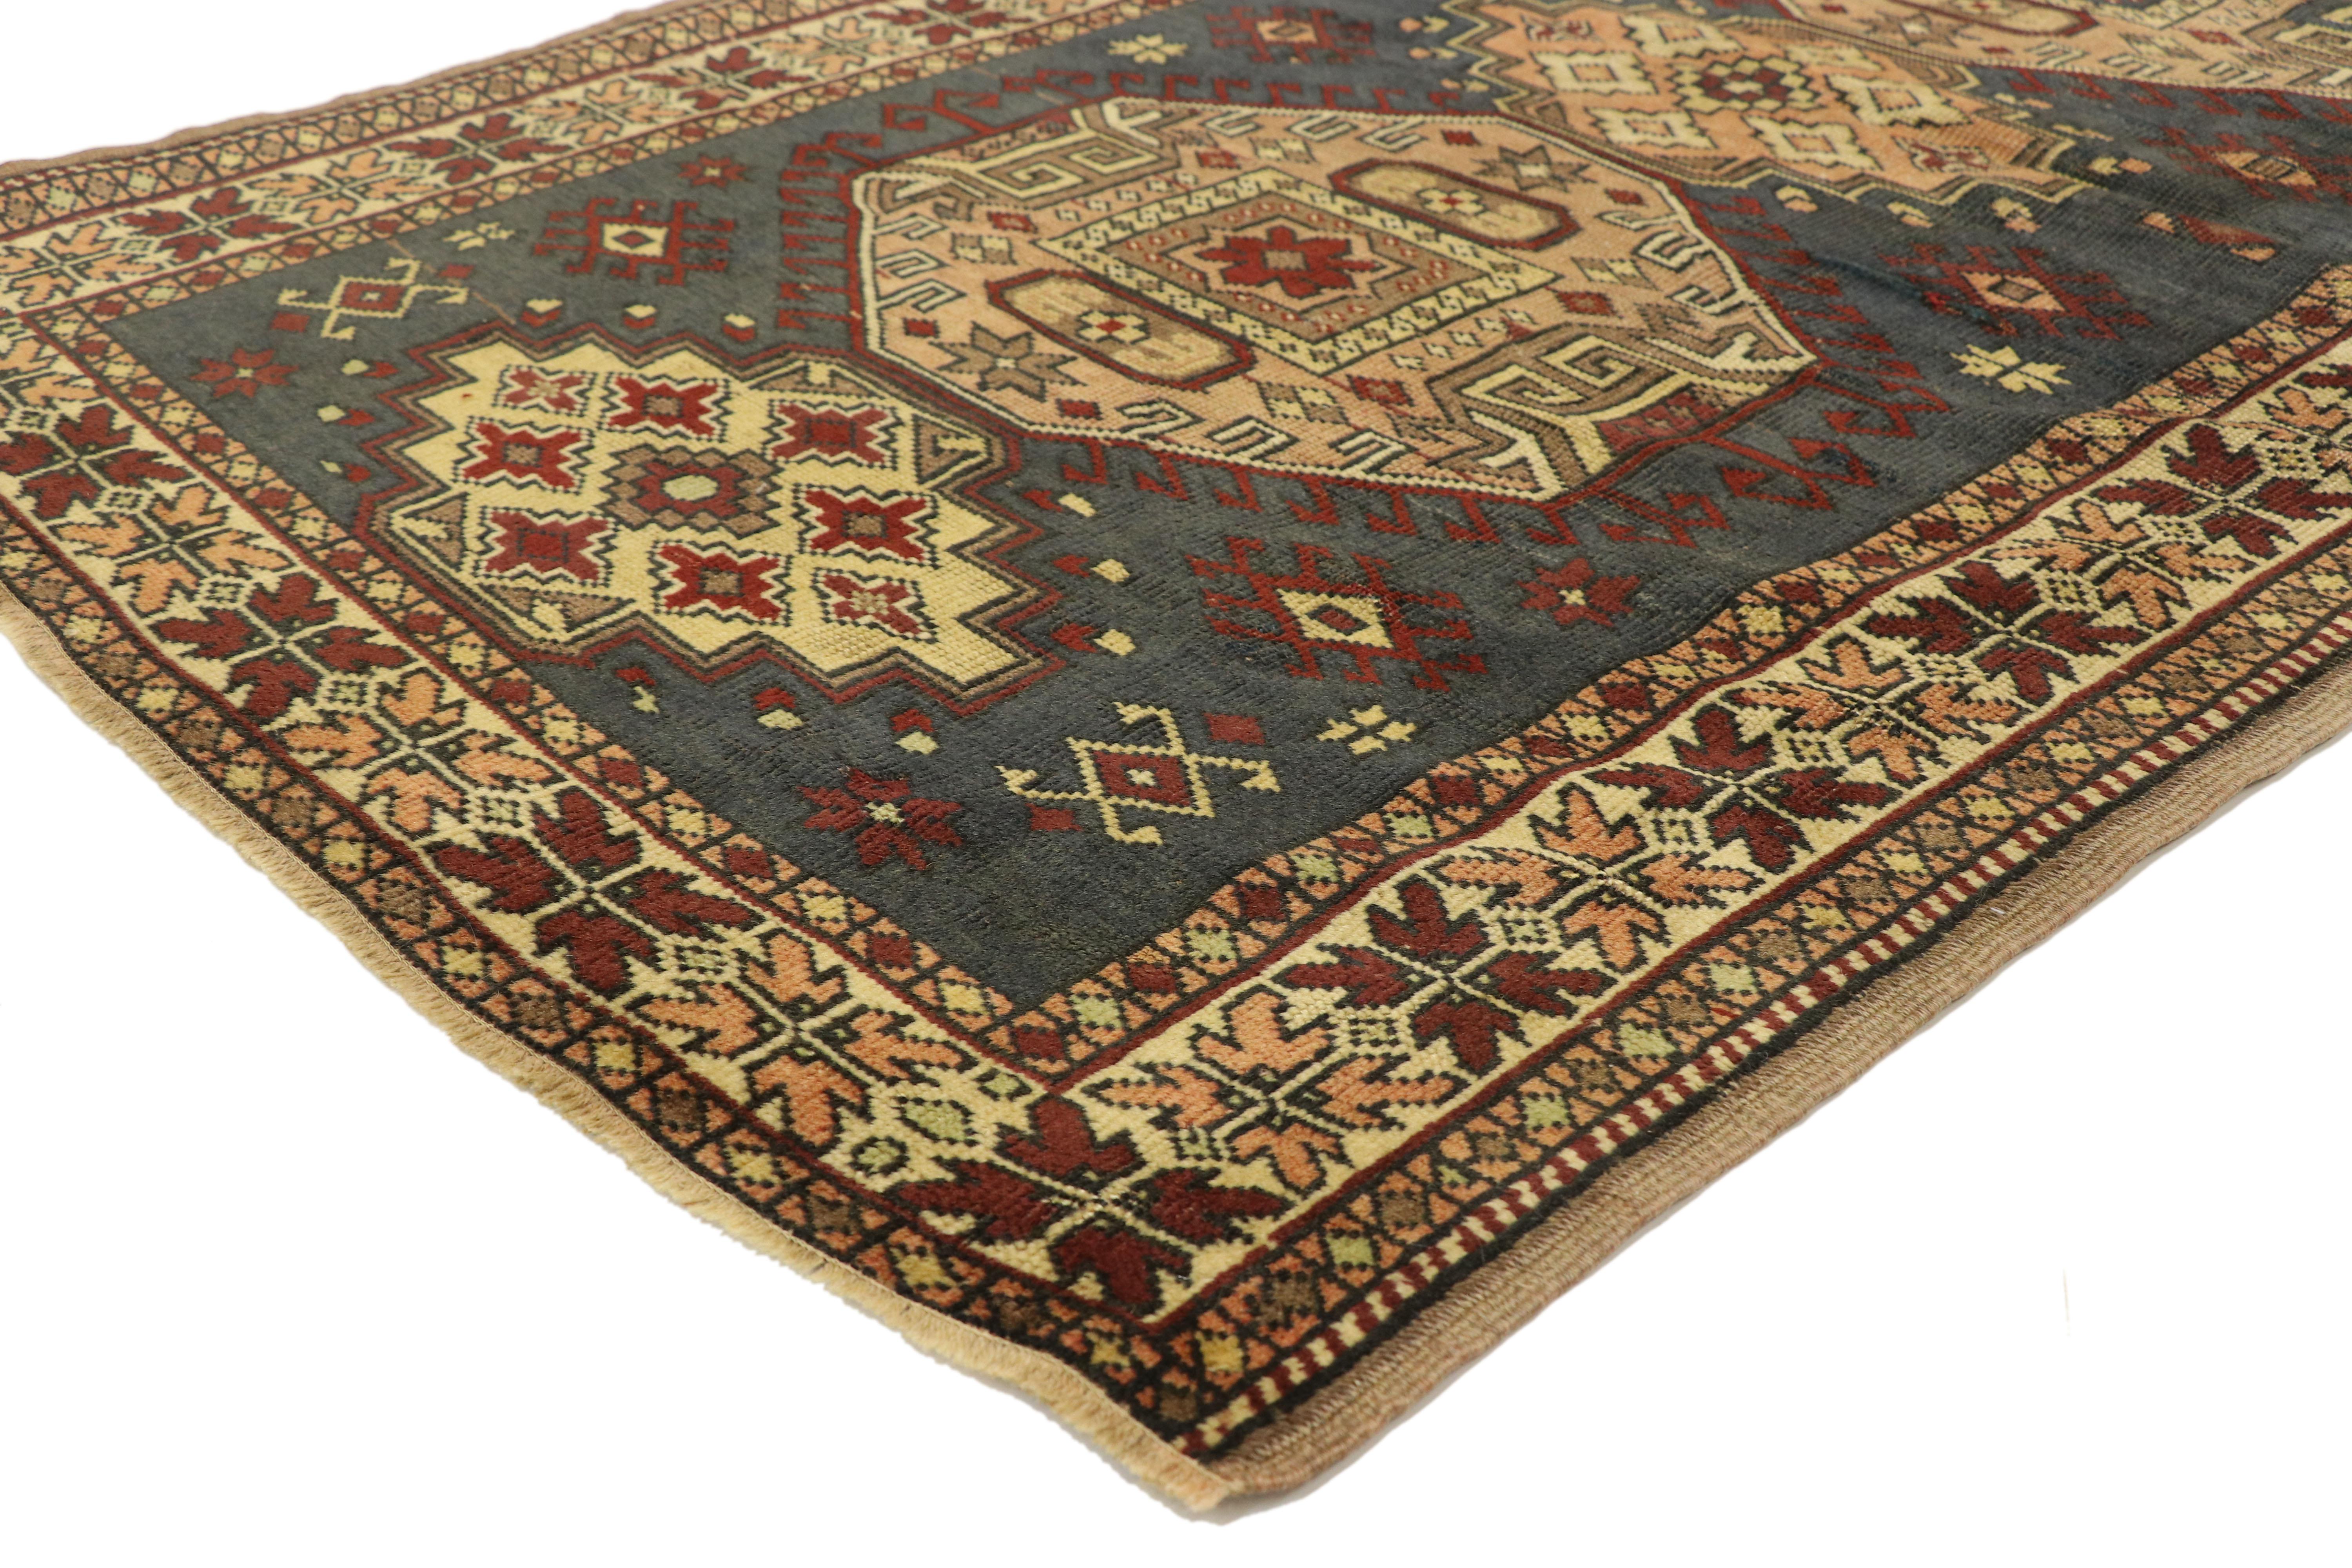 51406 vintage Turkish Oushak rug with Tribal style 03'07 x 06'05. Full of tiny details and a bold expressive design and tribal style, this hand-knotted wool vintage Turkish Oushak rug is a captivating vision of woven beauty. The abrashed field